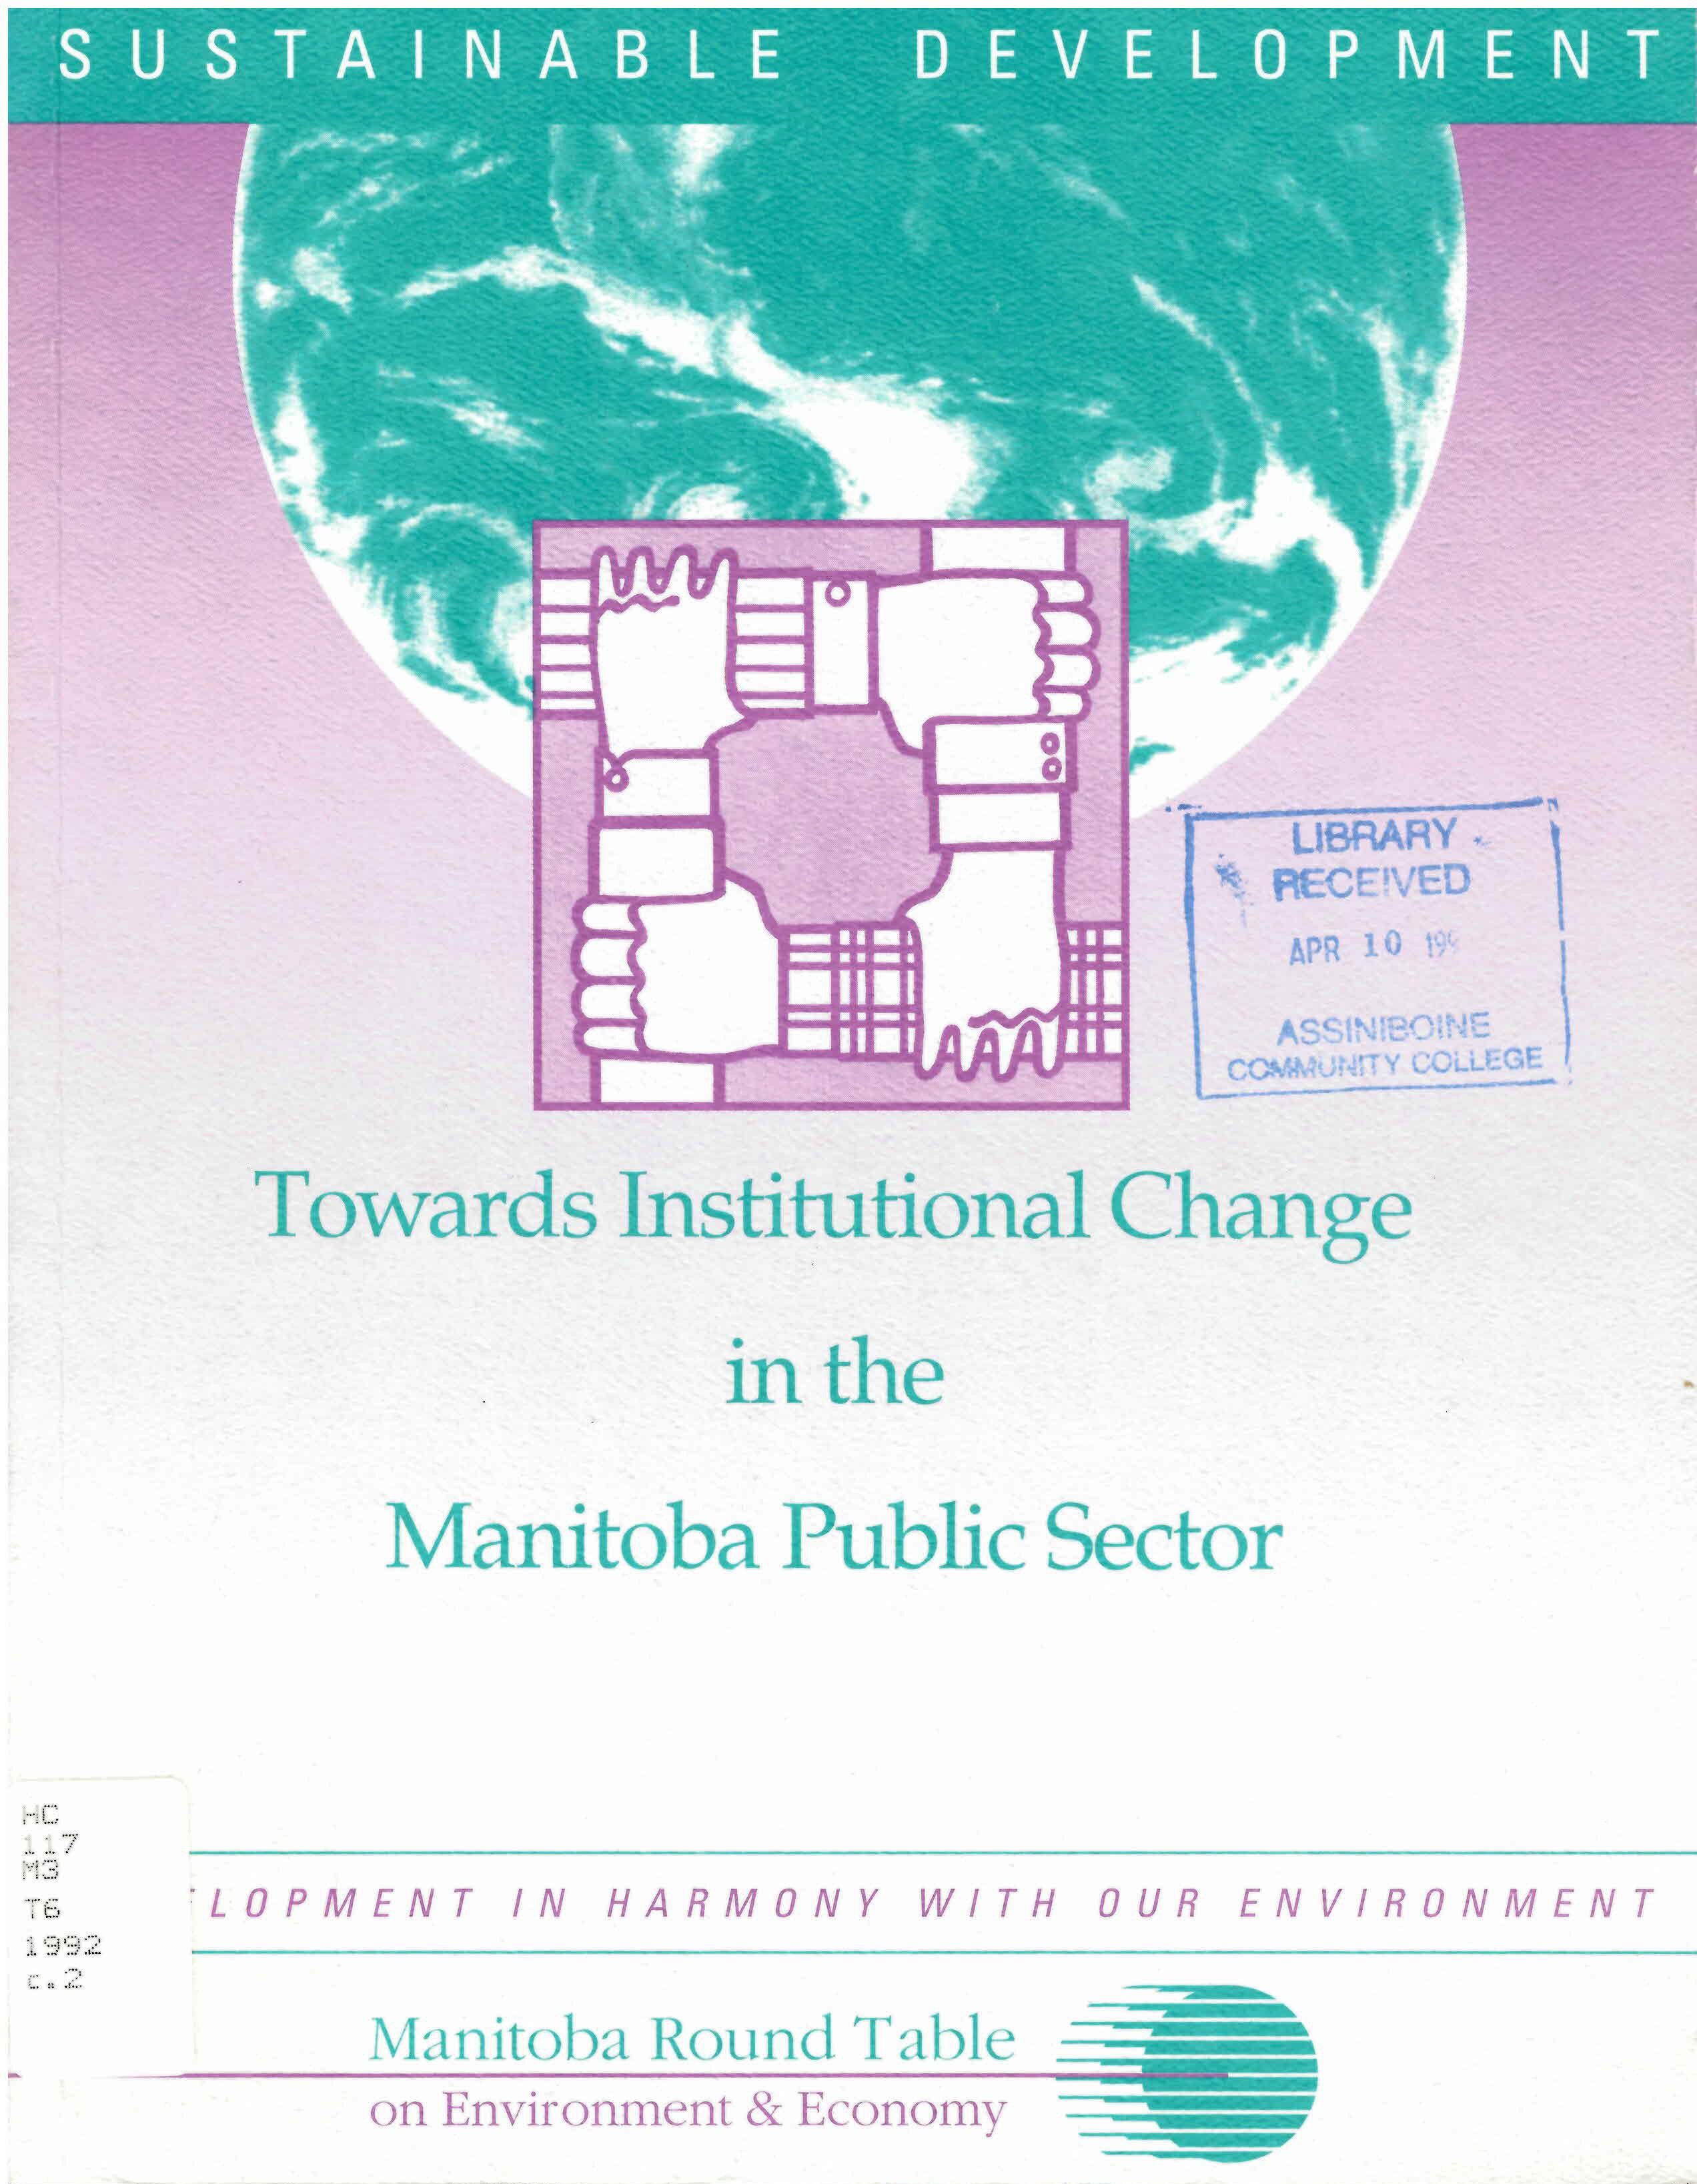 Towards institutional change in the Manitoba public sector.